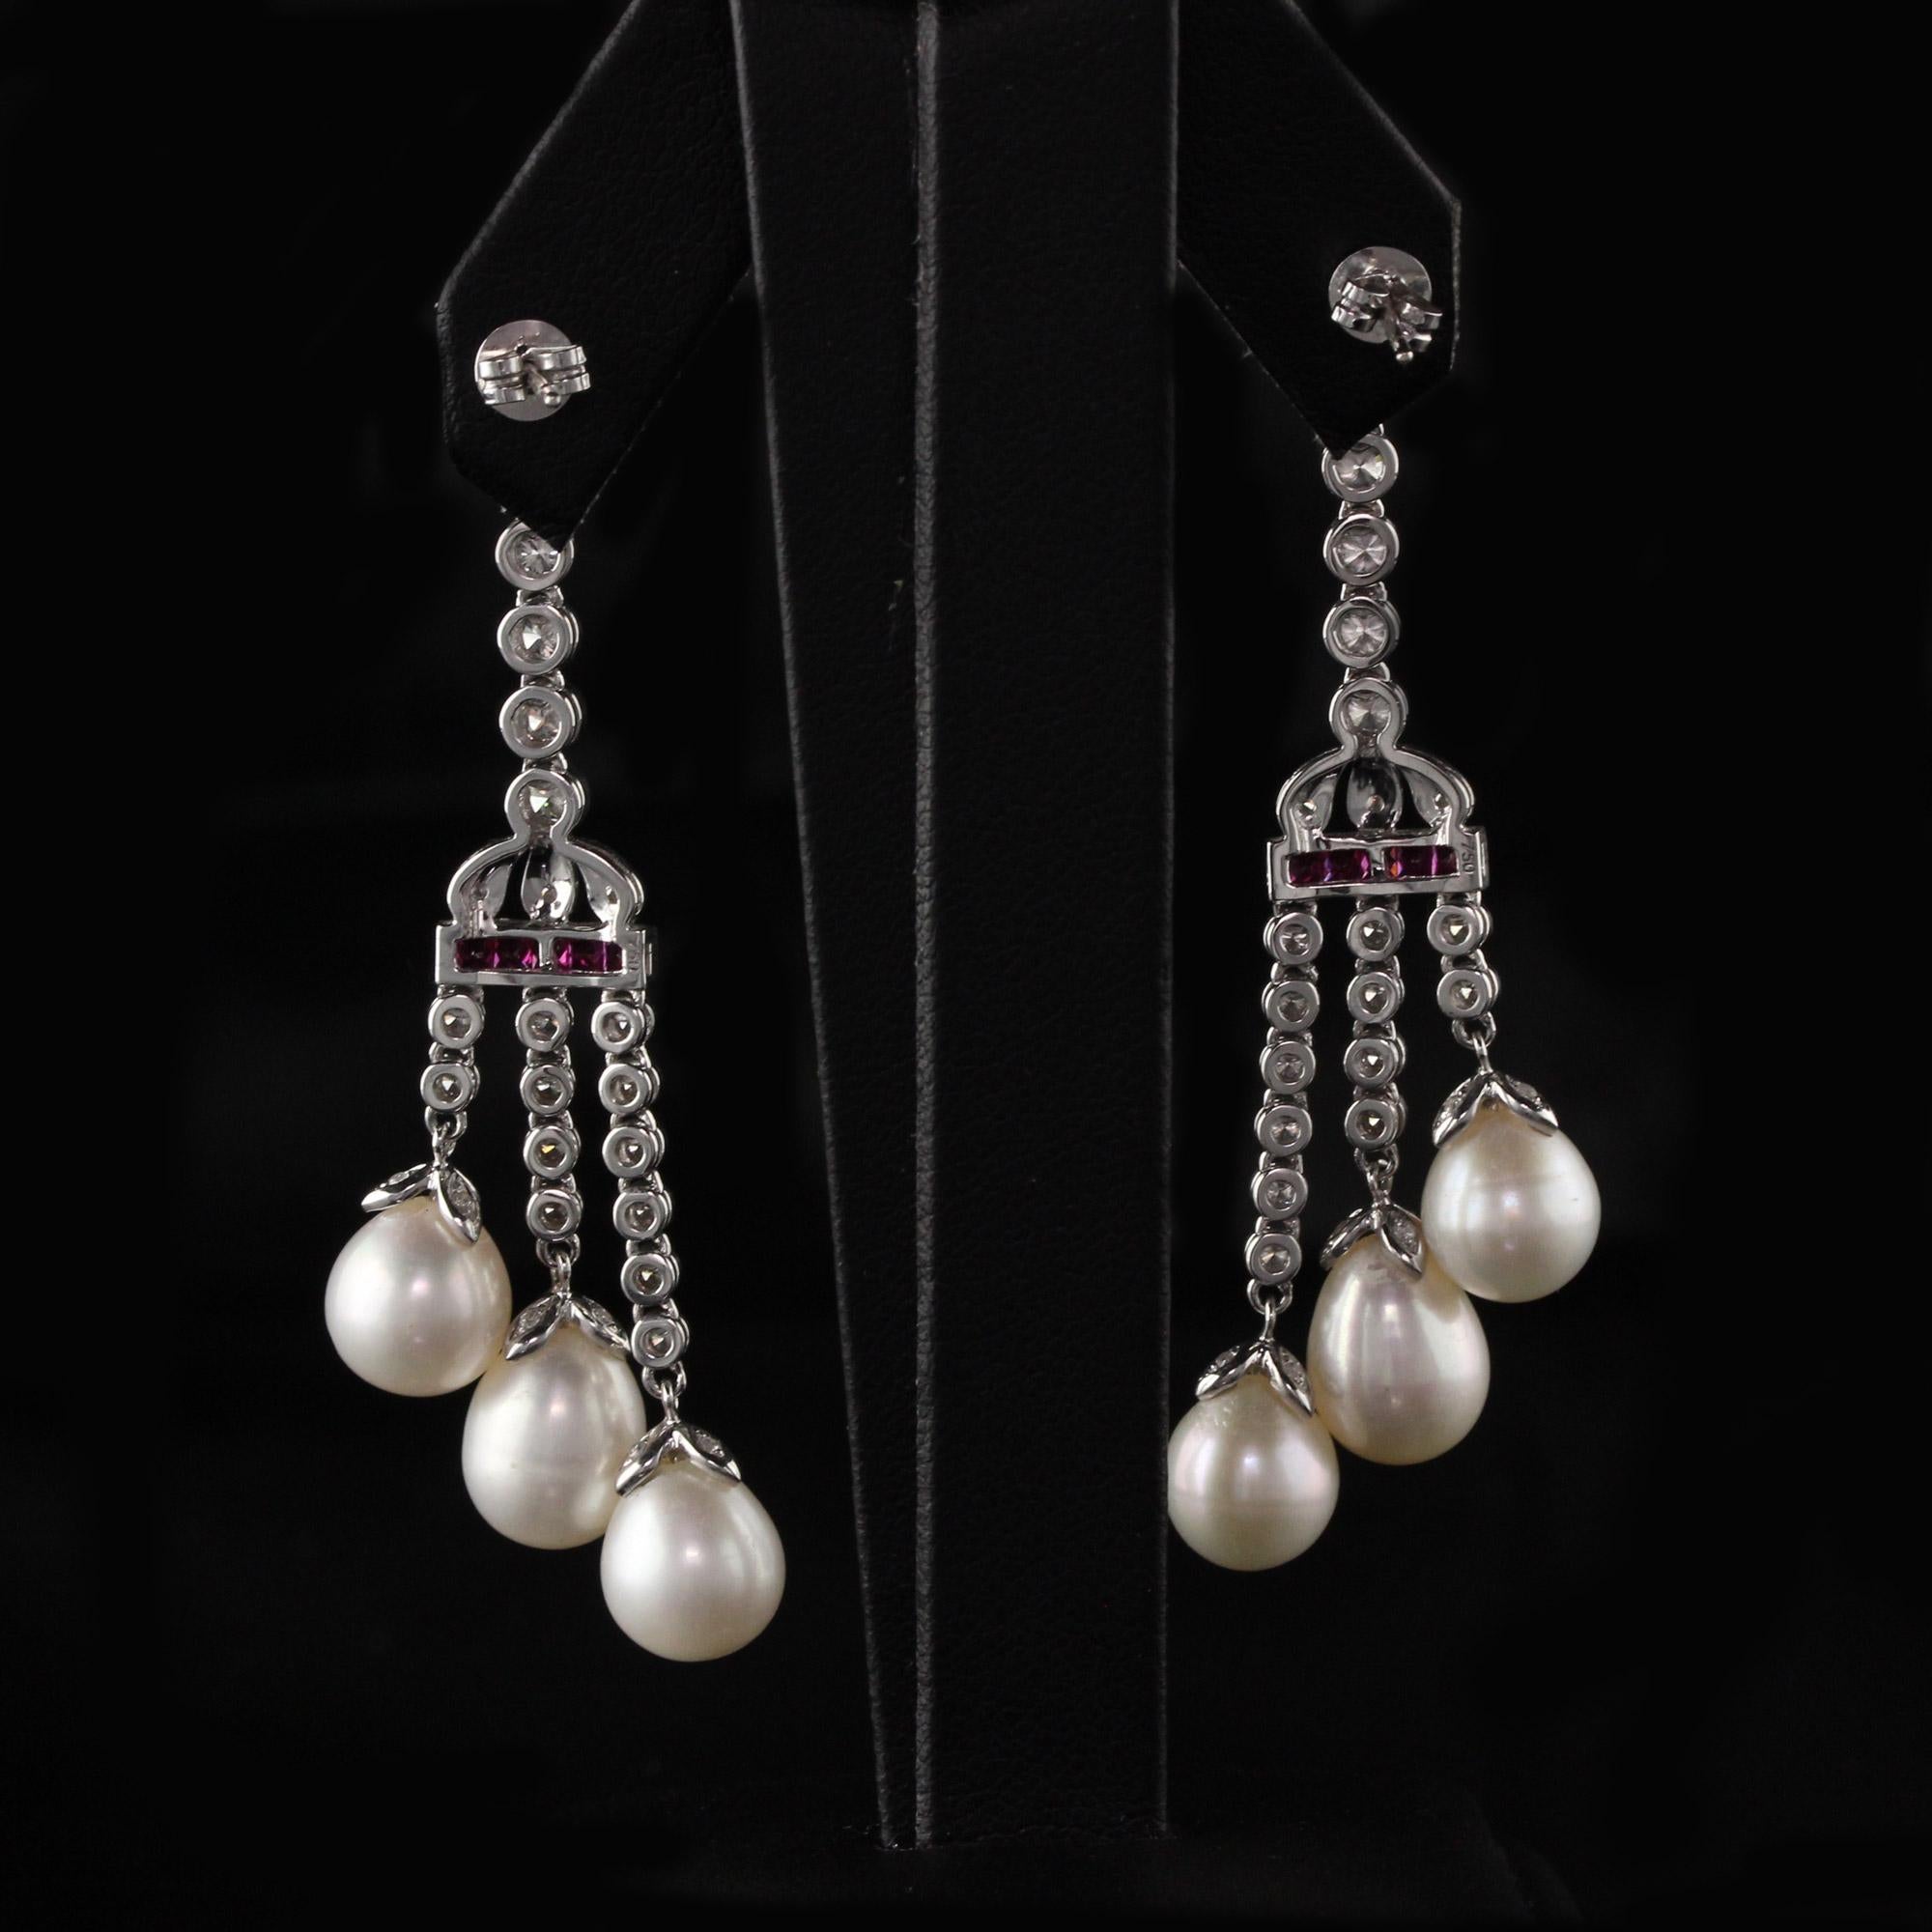 Vintage Estate 18 Karat White Gold Diamond, Ruby, and Pearl Earrings In Excellent Condition For Sale In Great Neck, NY